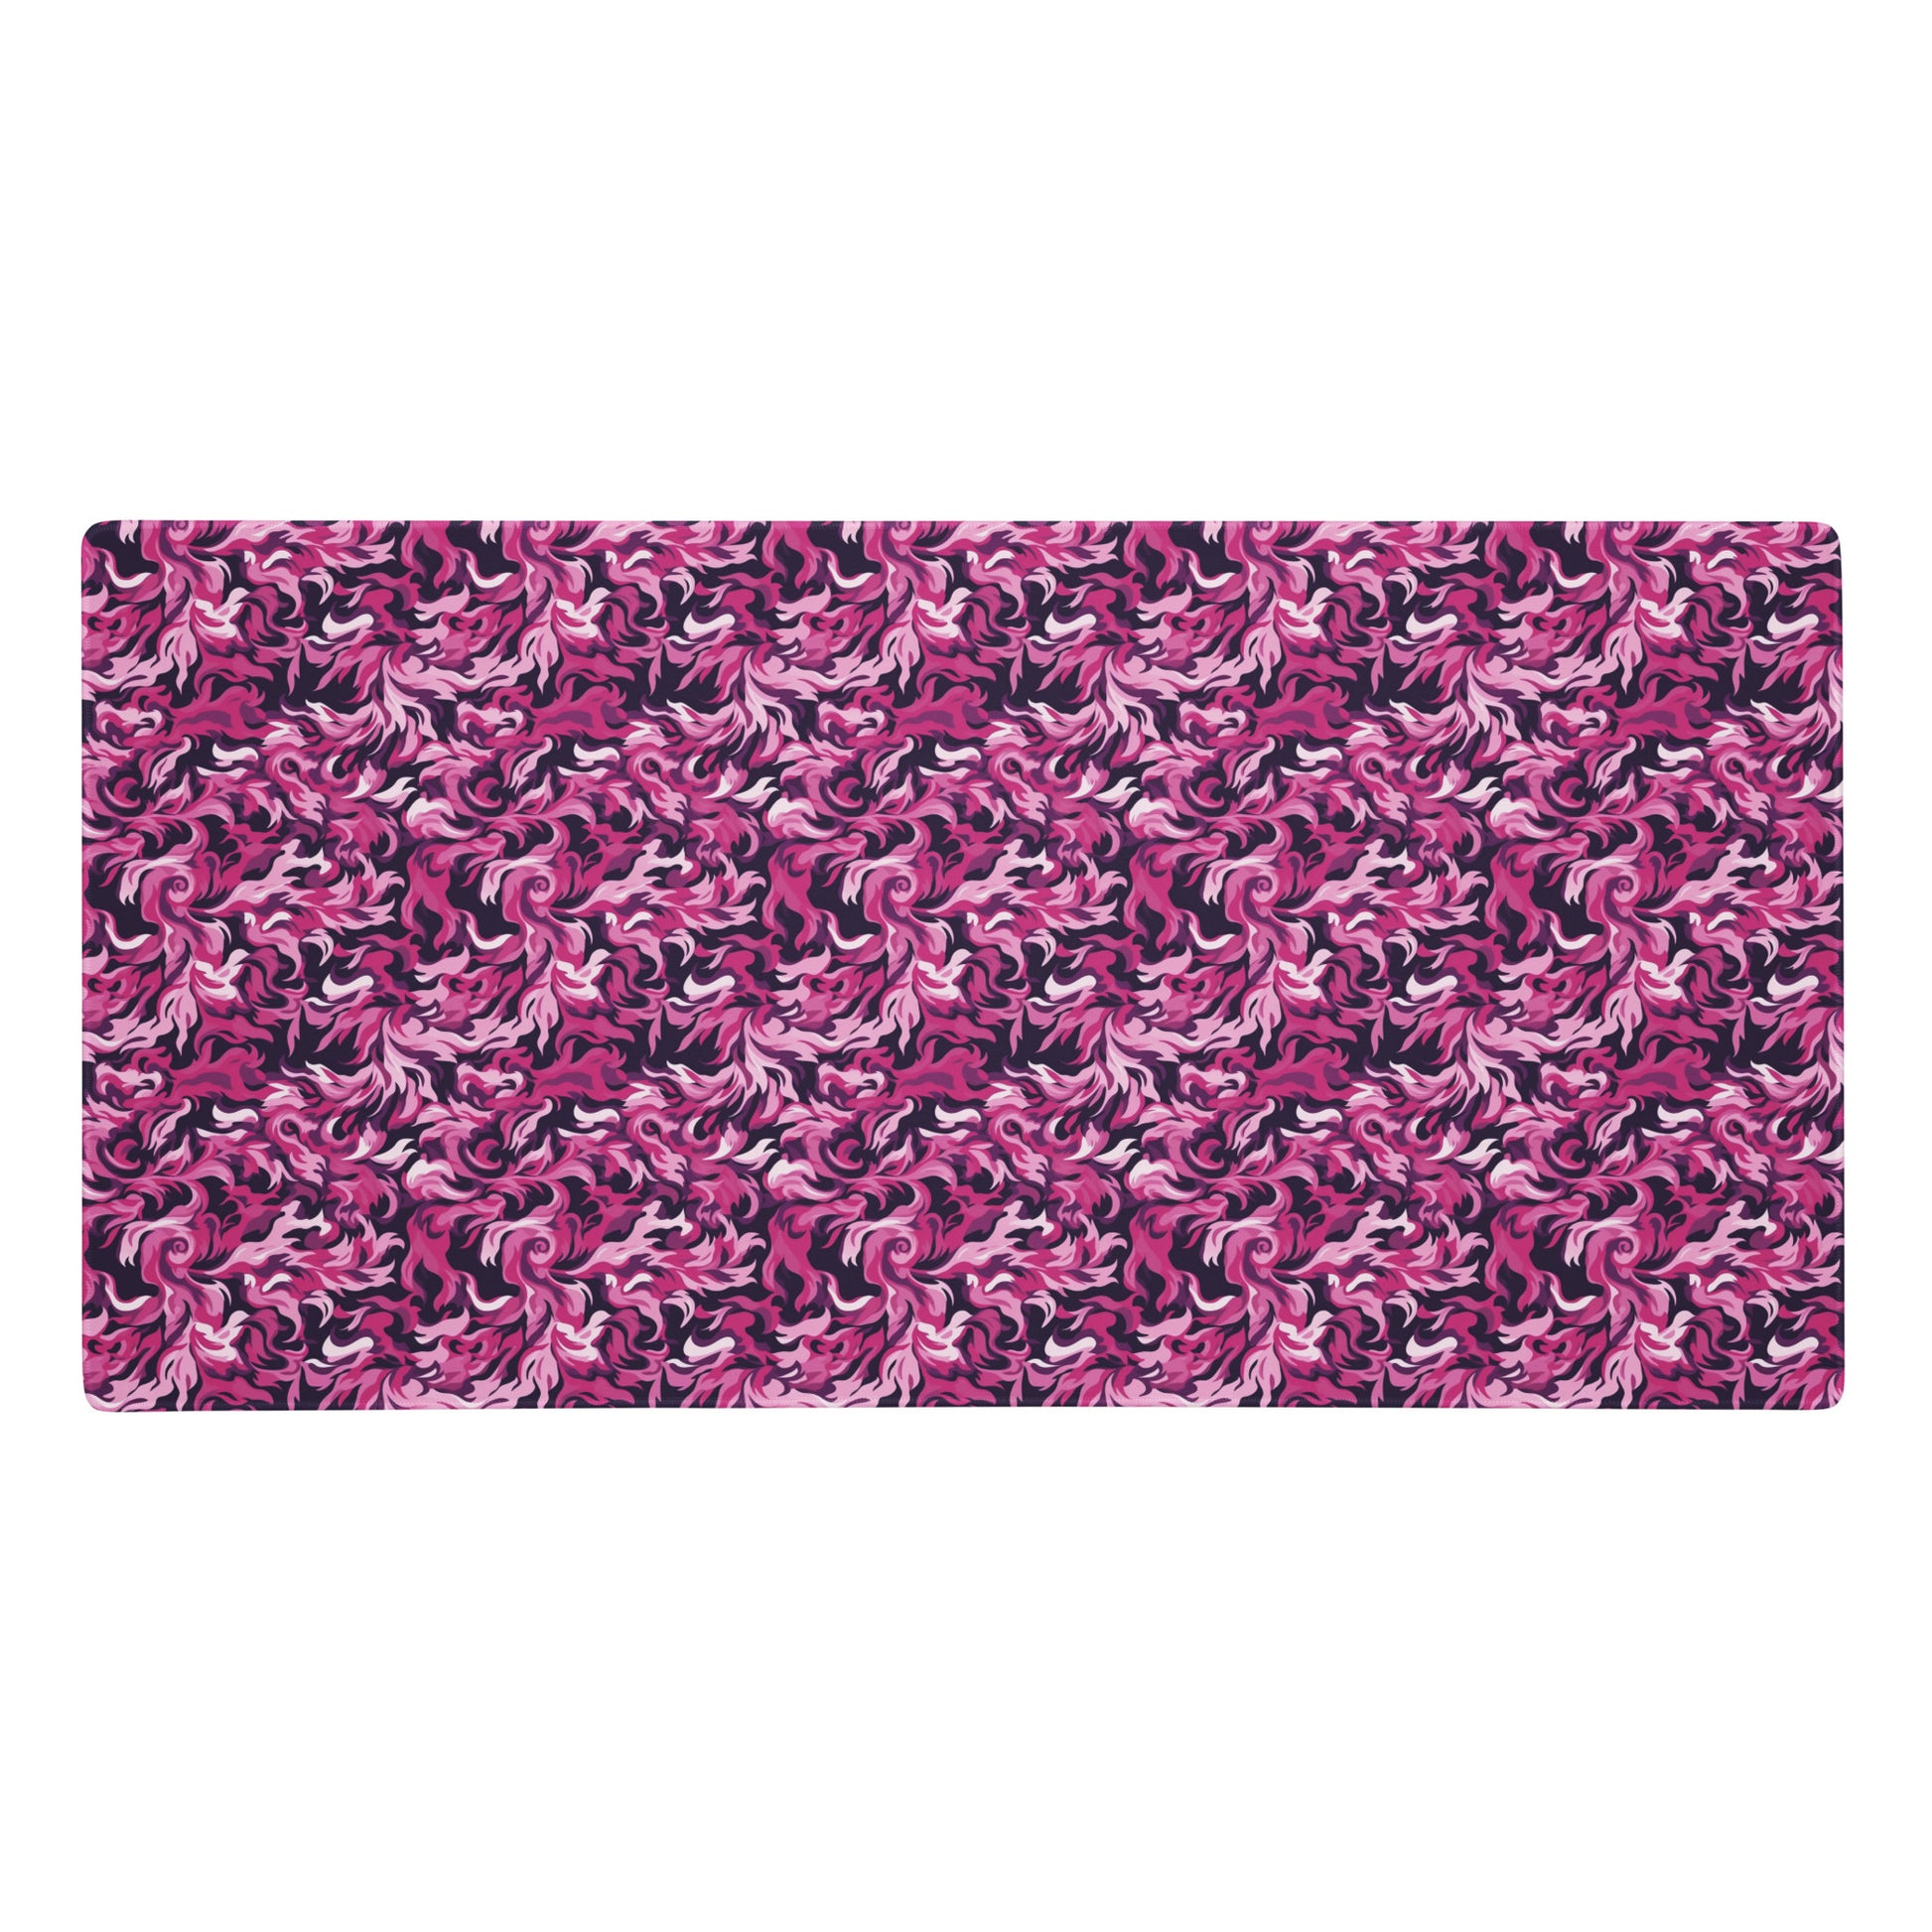 A 36" x 18" desk pad with a pink and magenta camo pattern.